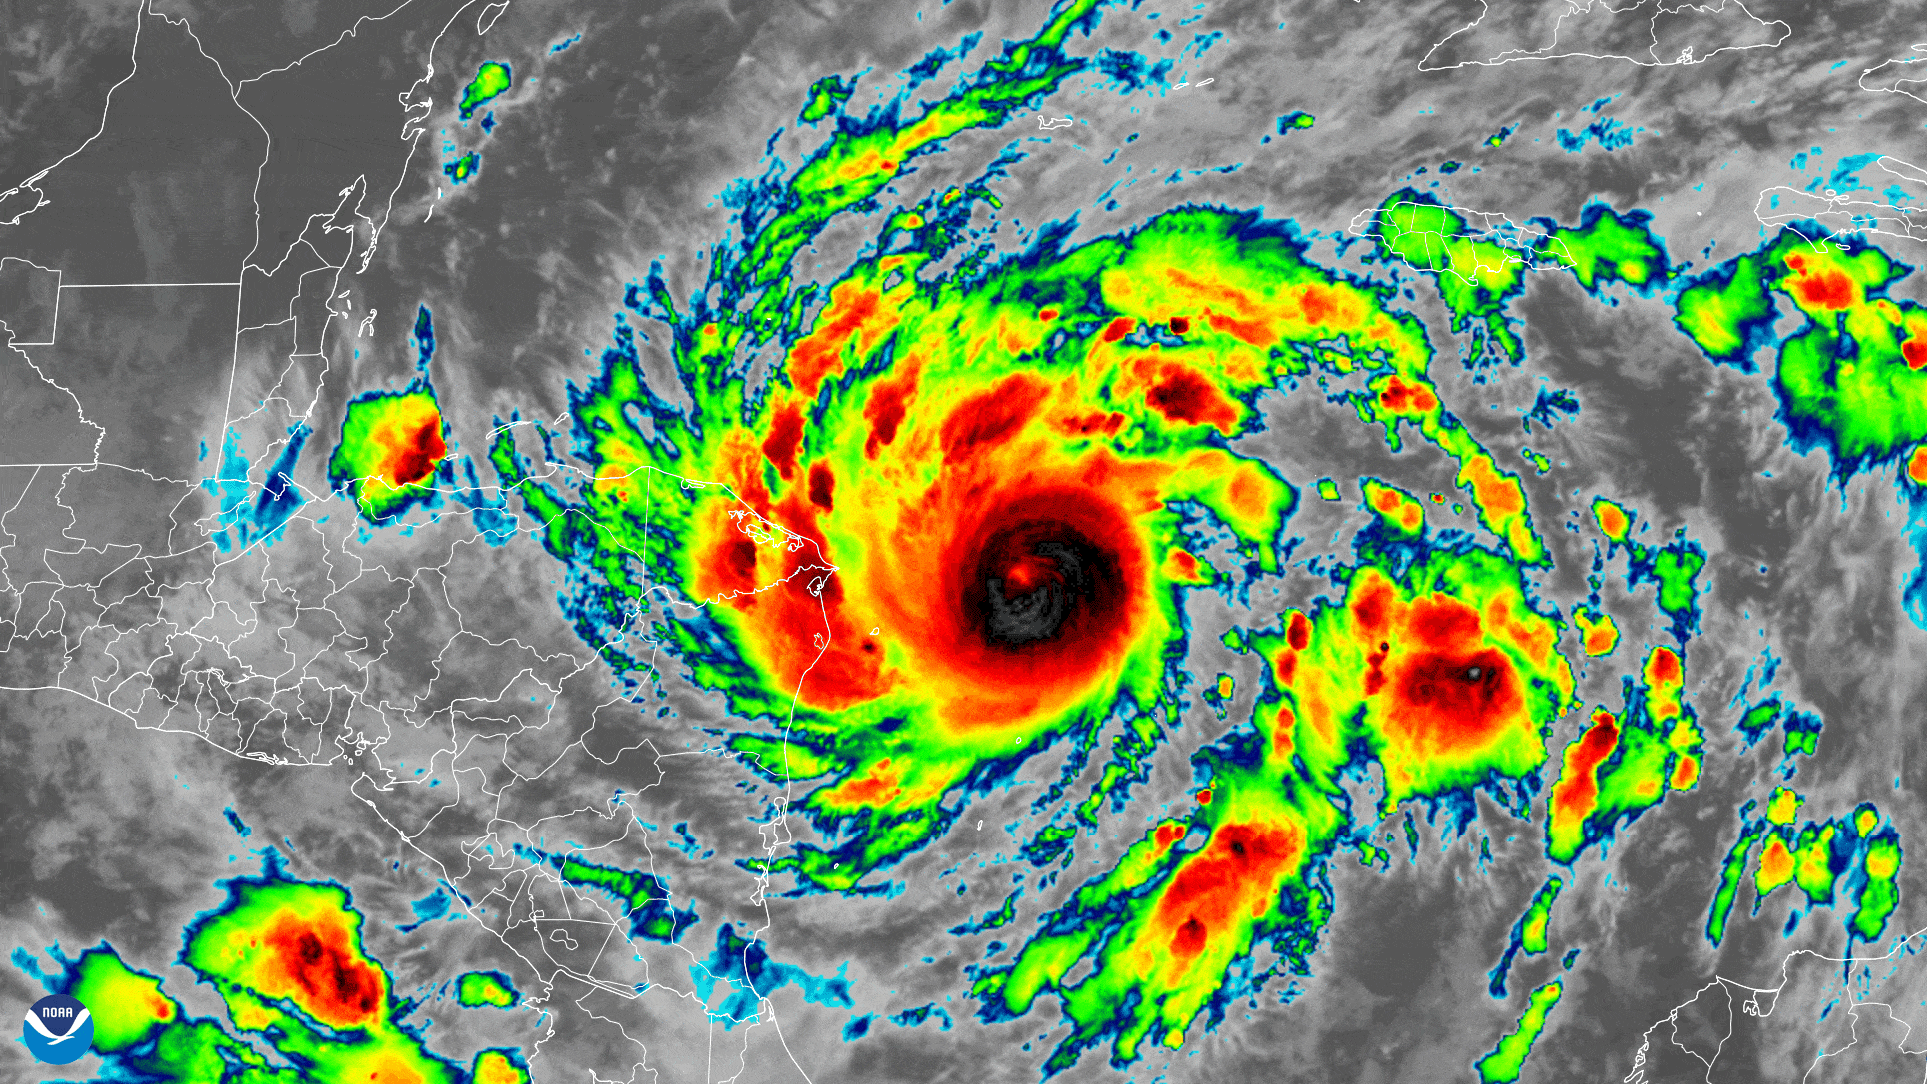 The GOES-East satellite watched Tropical Storm Eta strengthen into a hurricane over the Caribbean Sea on November 2nd, 2020.